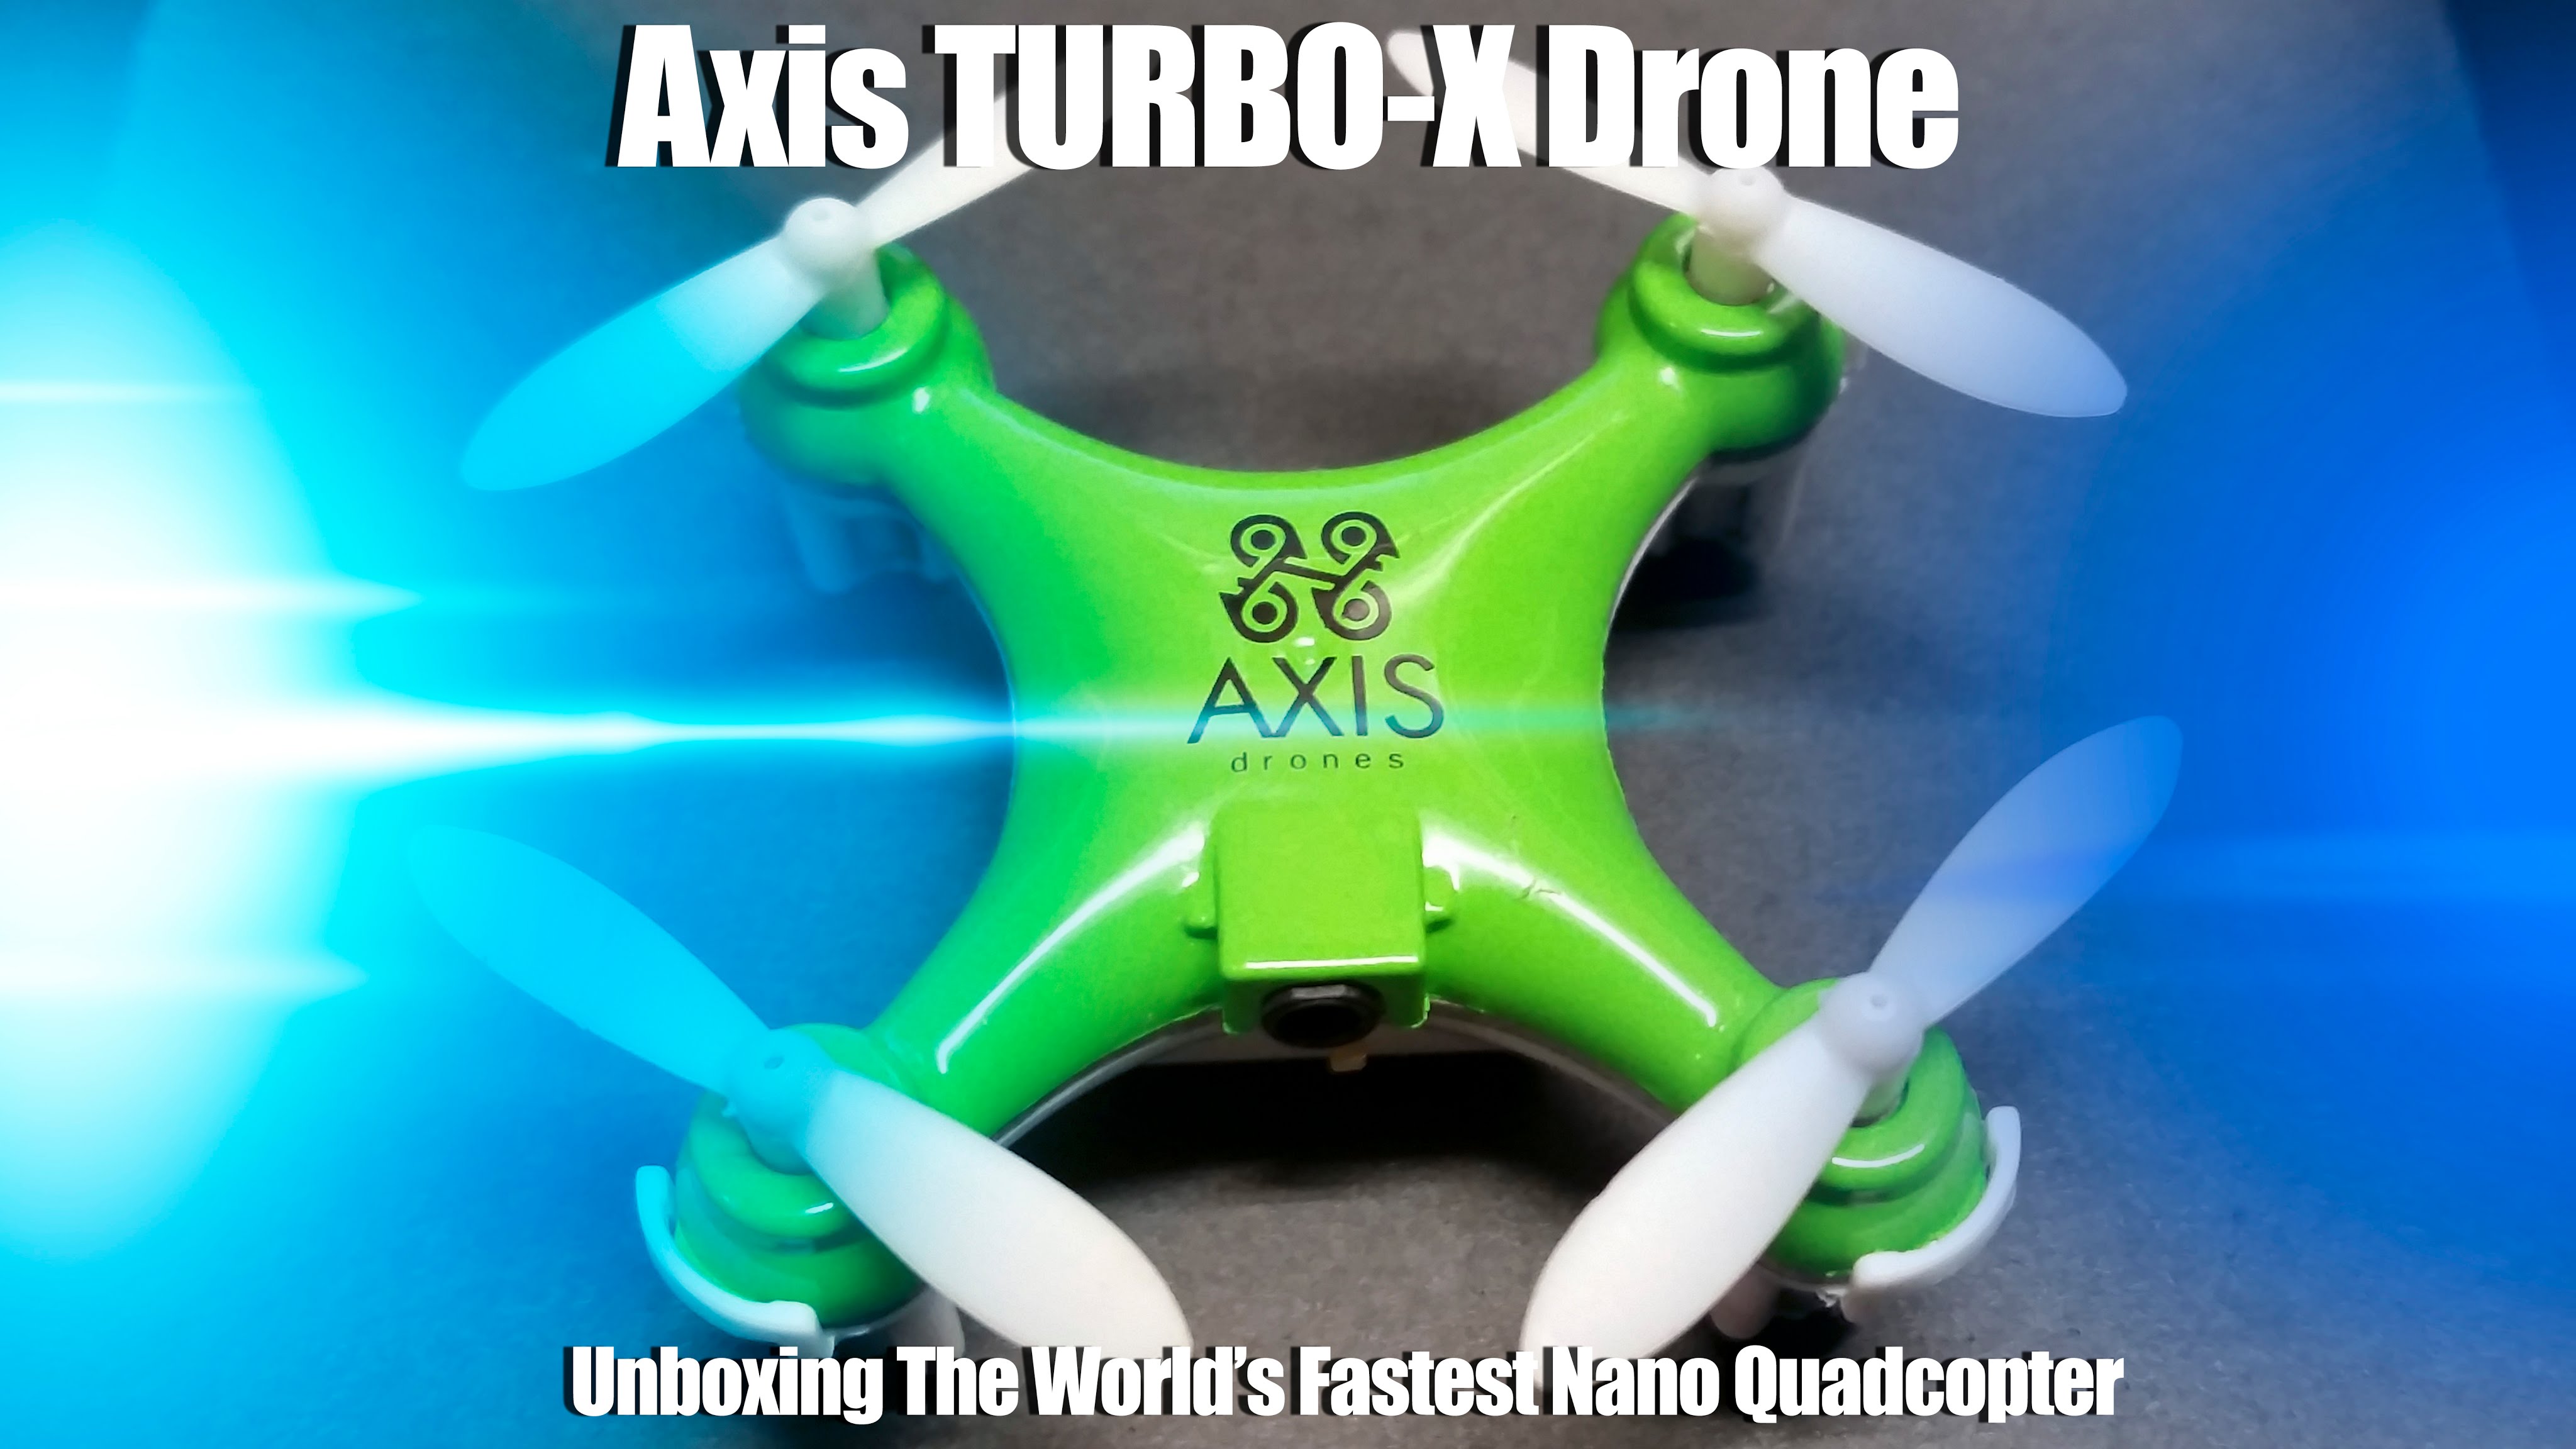 Axis Turbo-X: Unboxing The World’s Fastest Nano Quadcopter